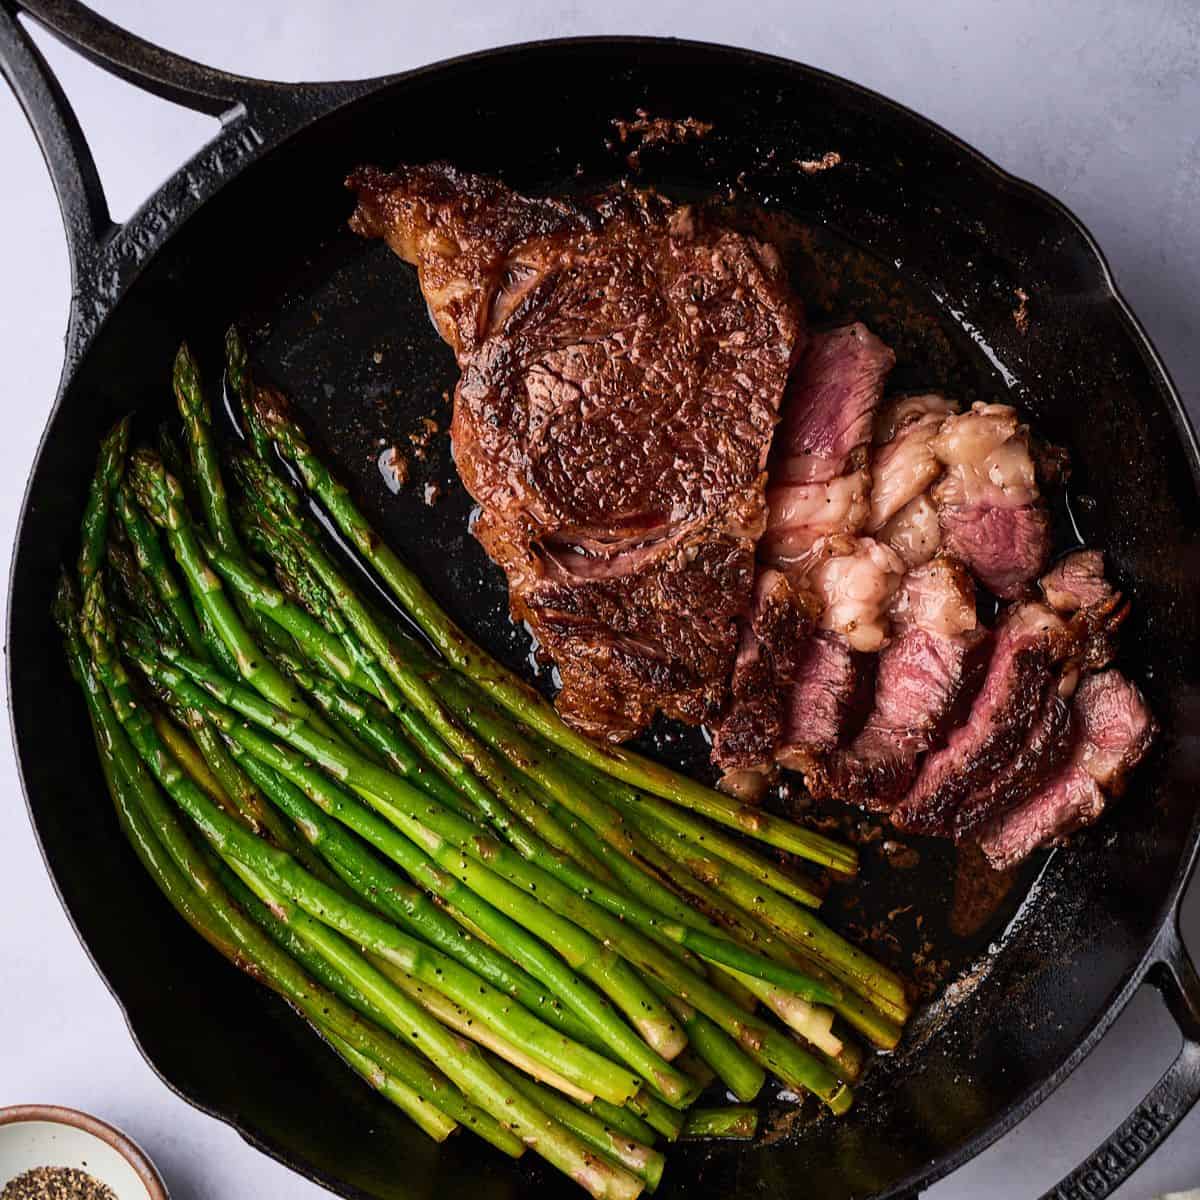 Ribeye steak and asparagus cooked in a cast iron skillet and cut into to reveal the center cooked a perfect medium rare.